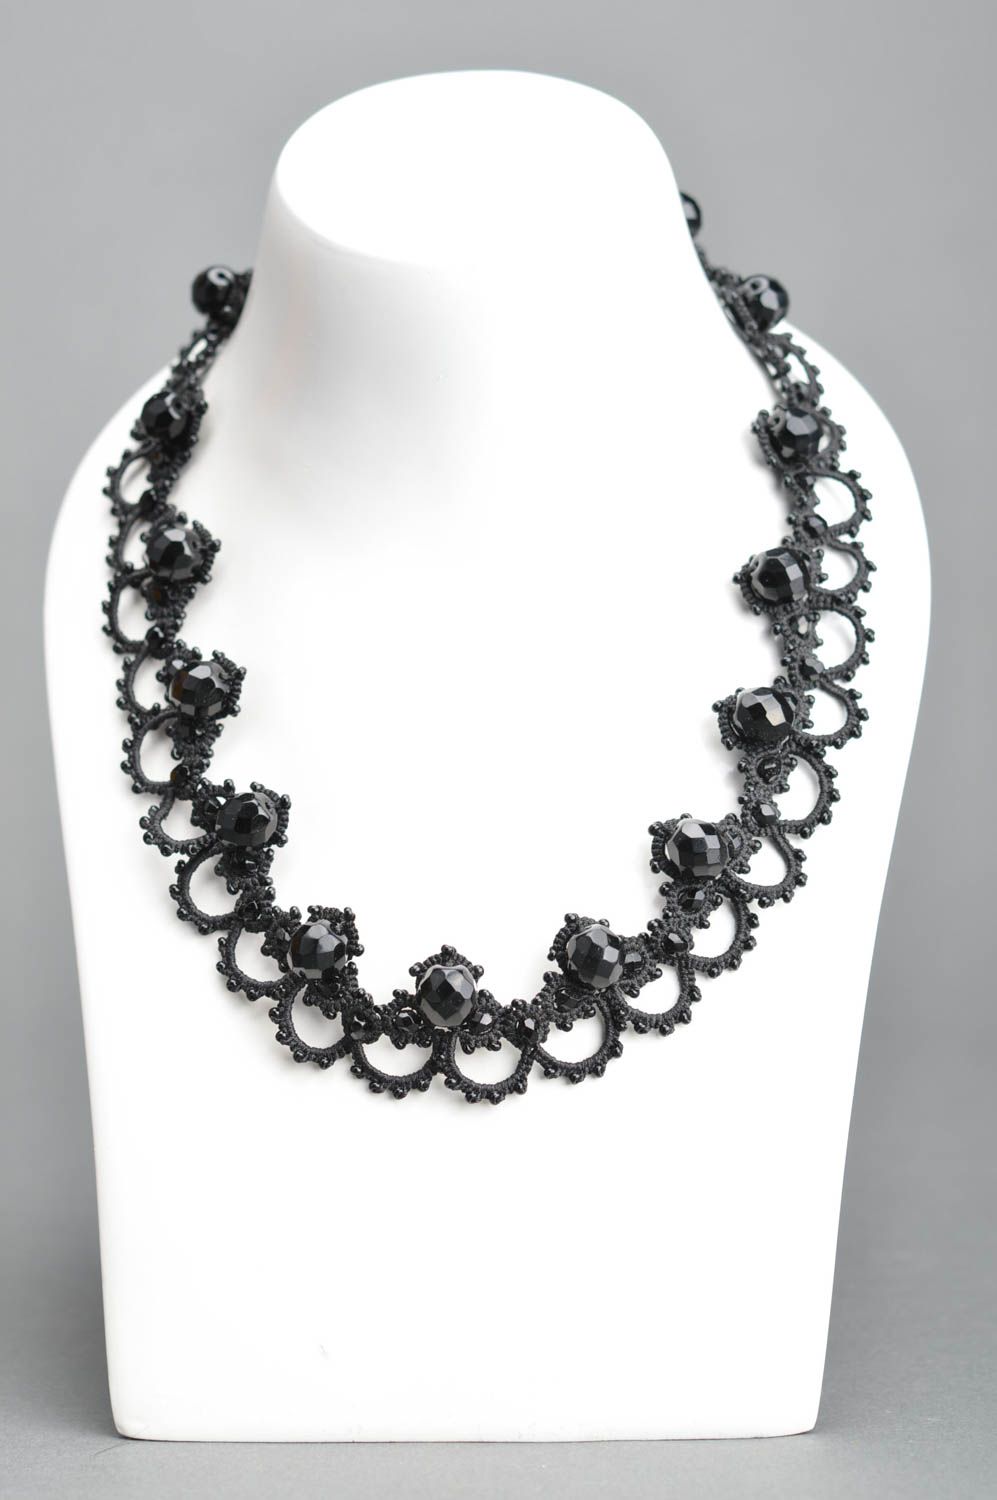 Handmade black necklace made of Czech beads and threads using tatting technique photo 1